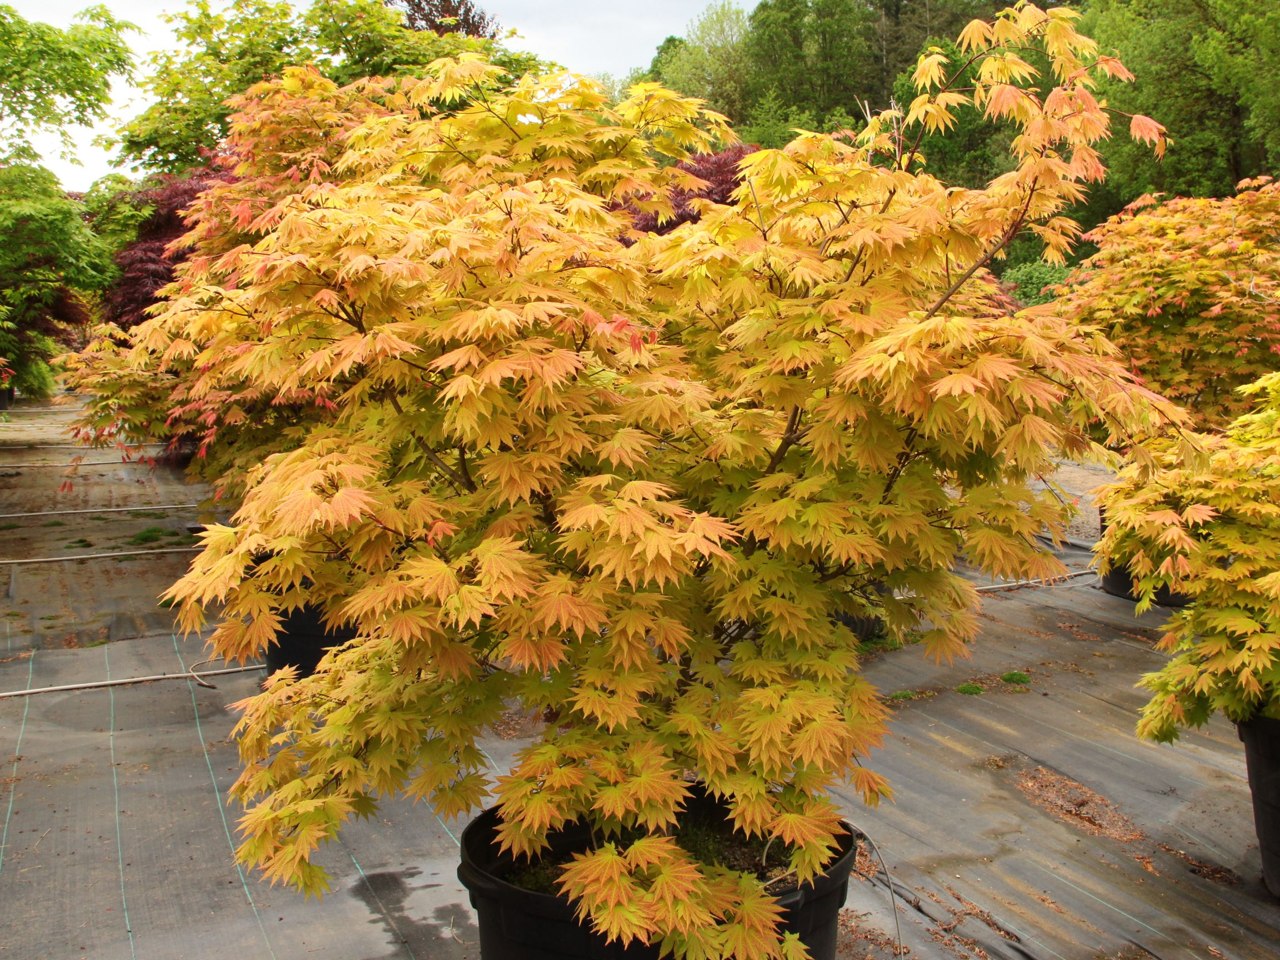 Vigorous, versatile and unbelievably easy to grow, this small, dramatic Full Moon maple boasts orange-red highlights on yellow leaves. The unusual coloring, strongest in full sun, lasts from when leaves emerge in spring until they go rich orange-red in fa